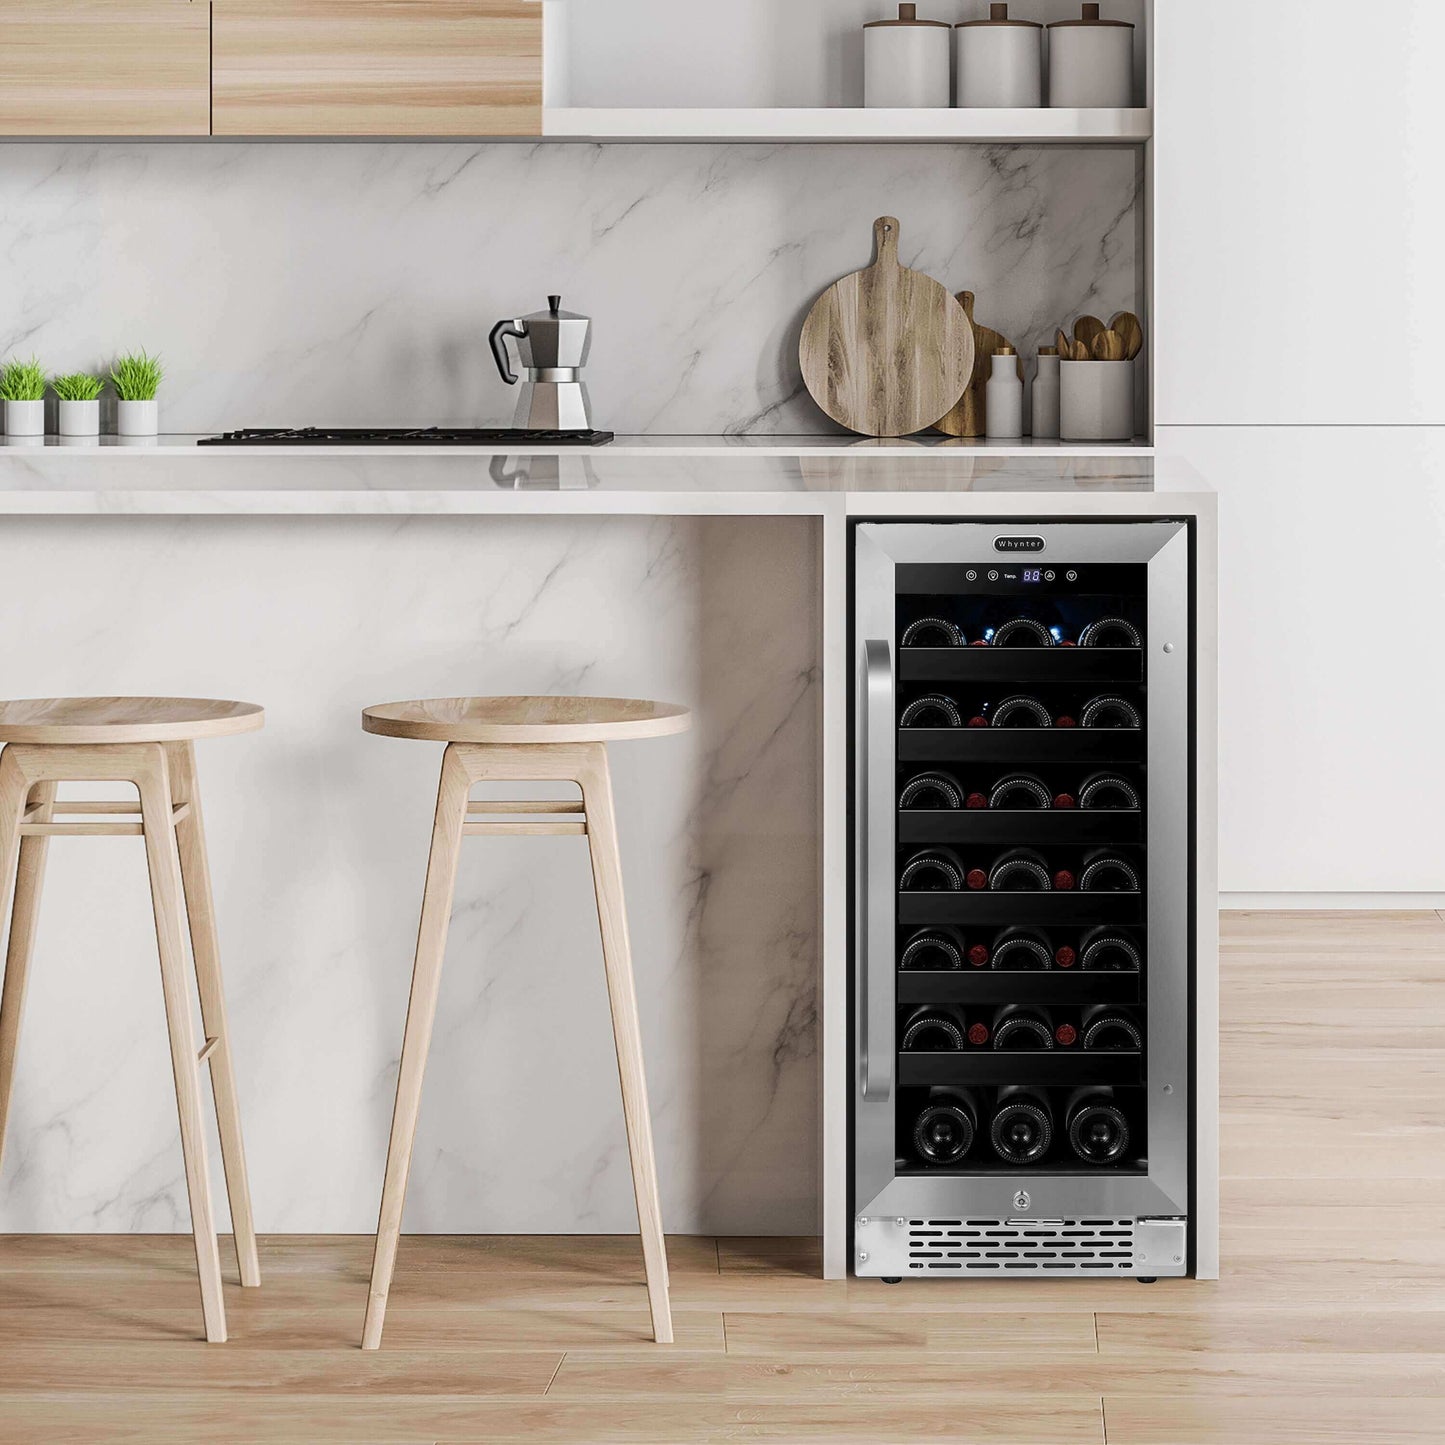 Whynter 15 inch Built-In 33 Bottle Undercounter Stainless Steel Wine Refrigerator with Reversible Door, Digital Control, Lock, and Carbon Filter